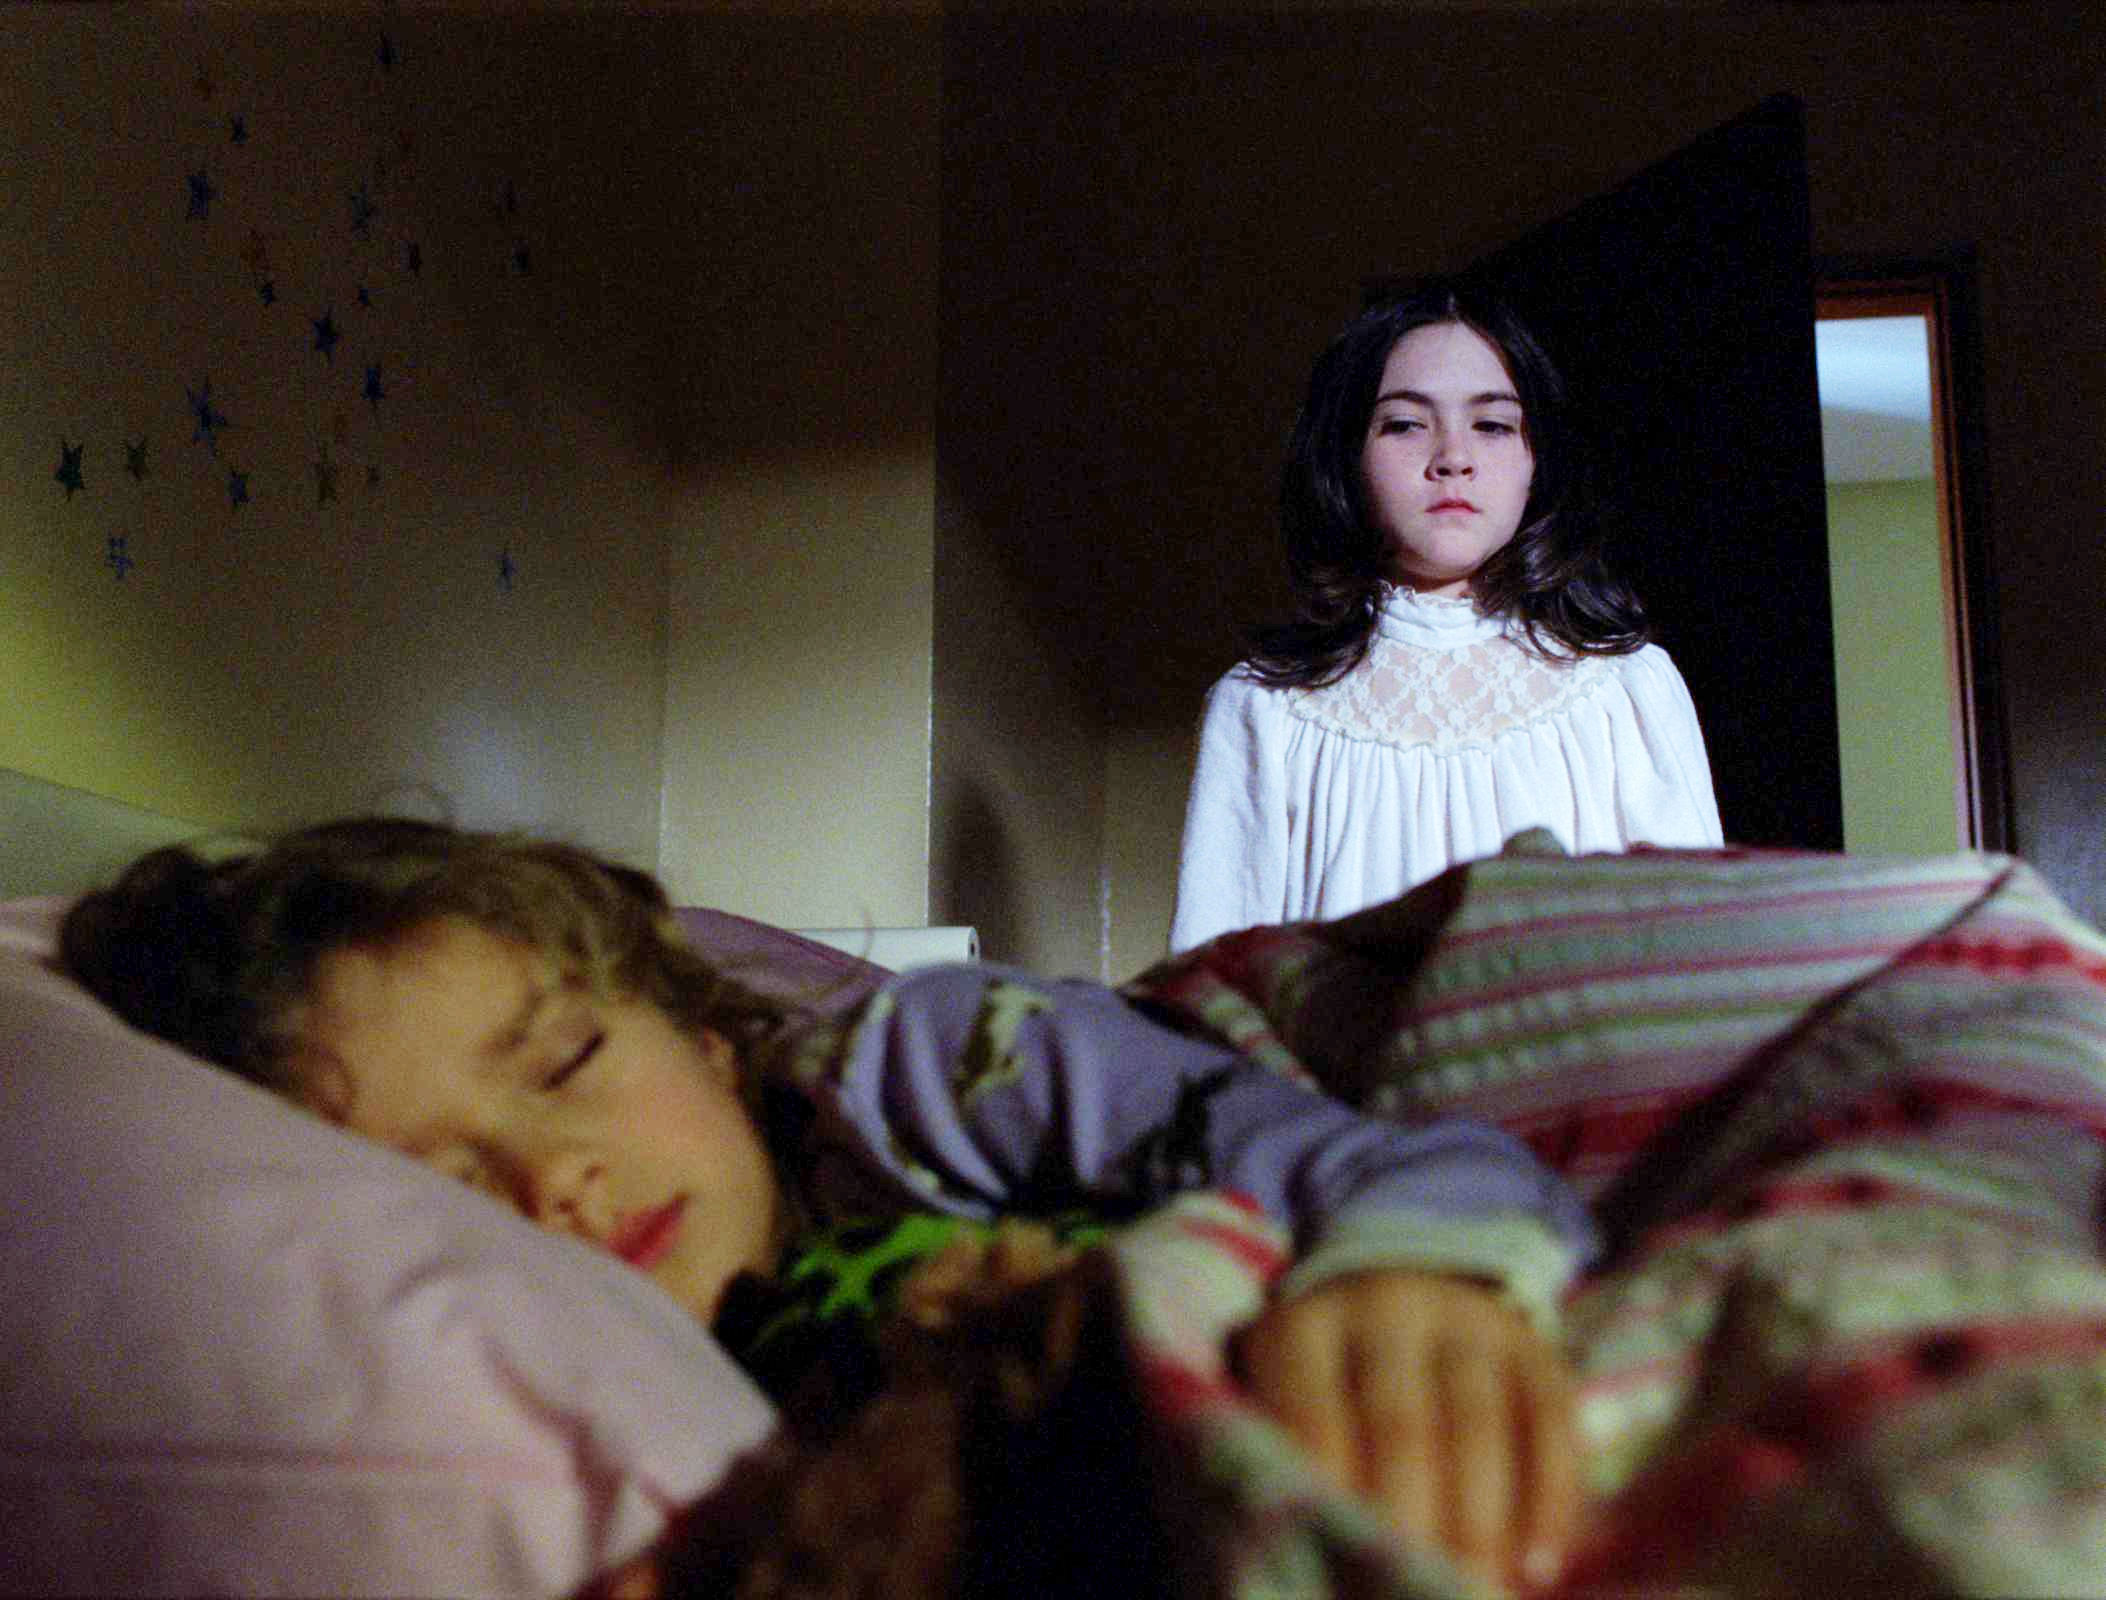 Aryana Engineer stars as Max Coleman and Isabelle Fuhrman stars as Esther in Warner Bros. Pictures' Orphan (2009)